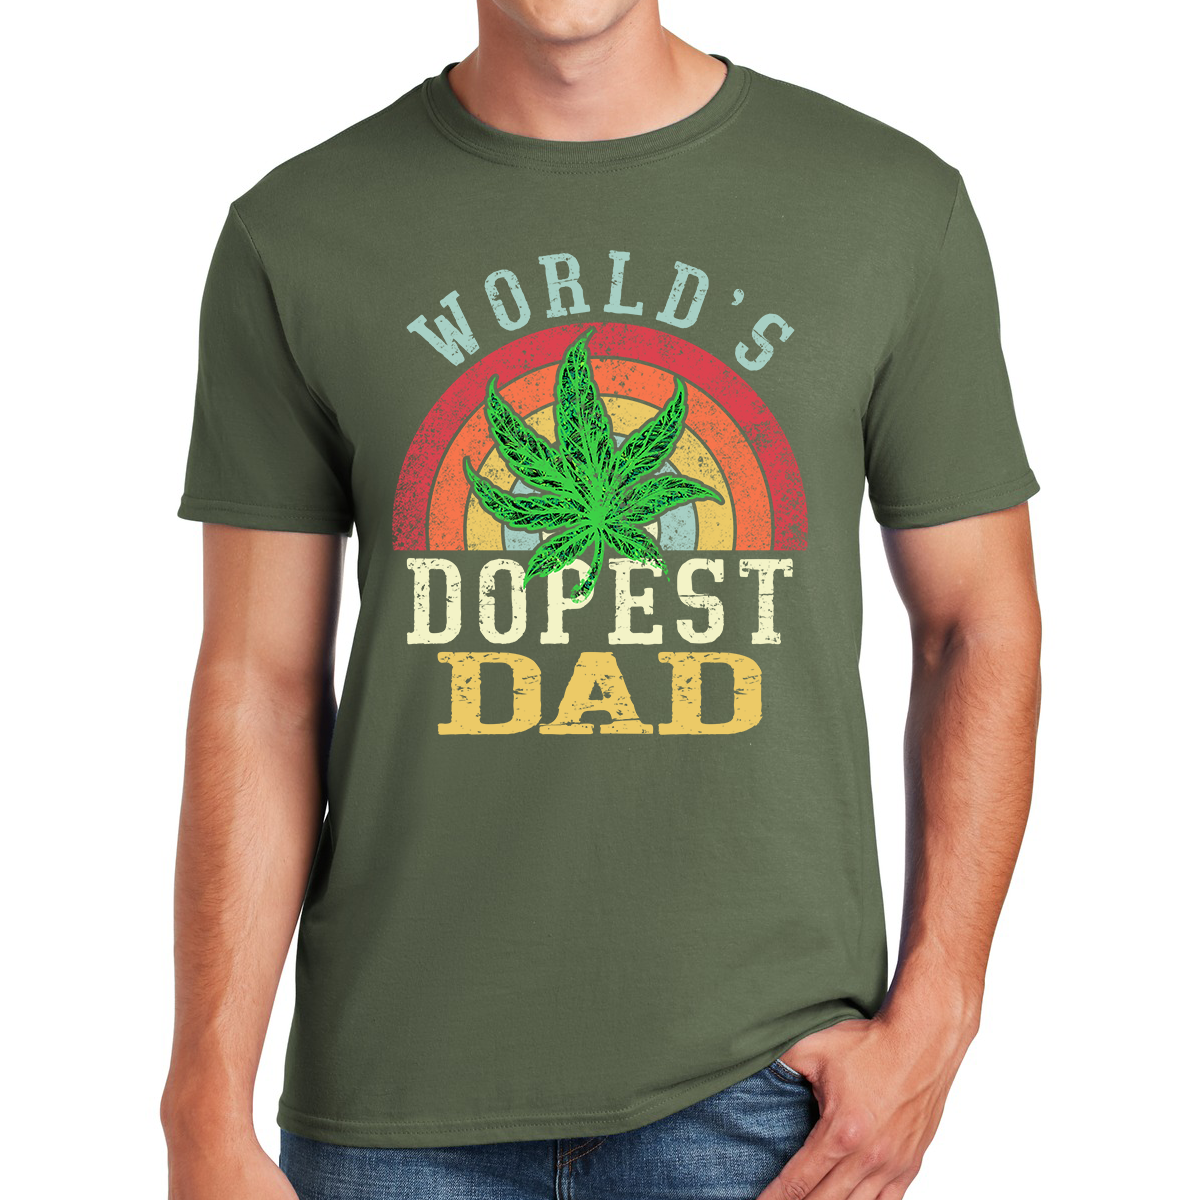 World's Dopest Dad Rocking Fatherhood With Style And Love Awesome Dad T-shirt